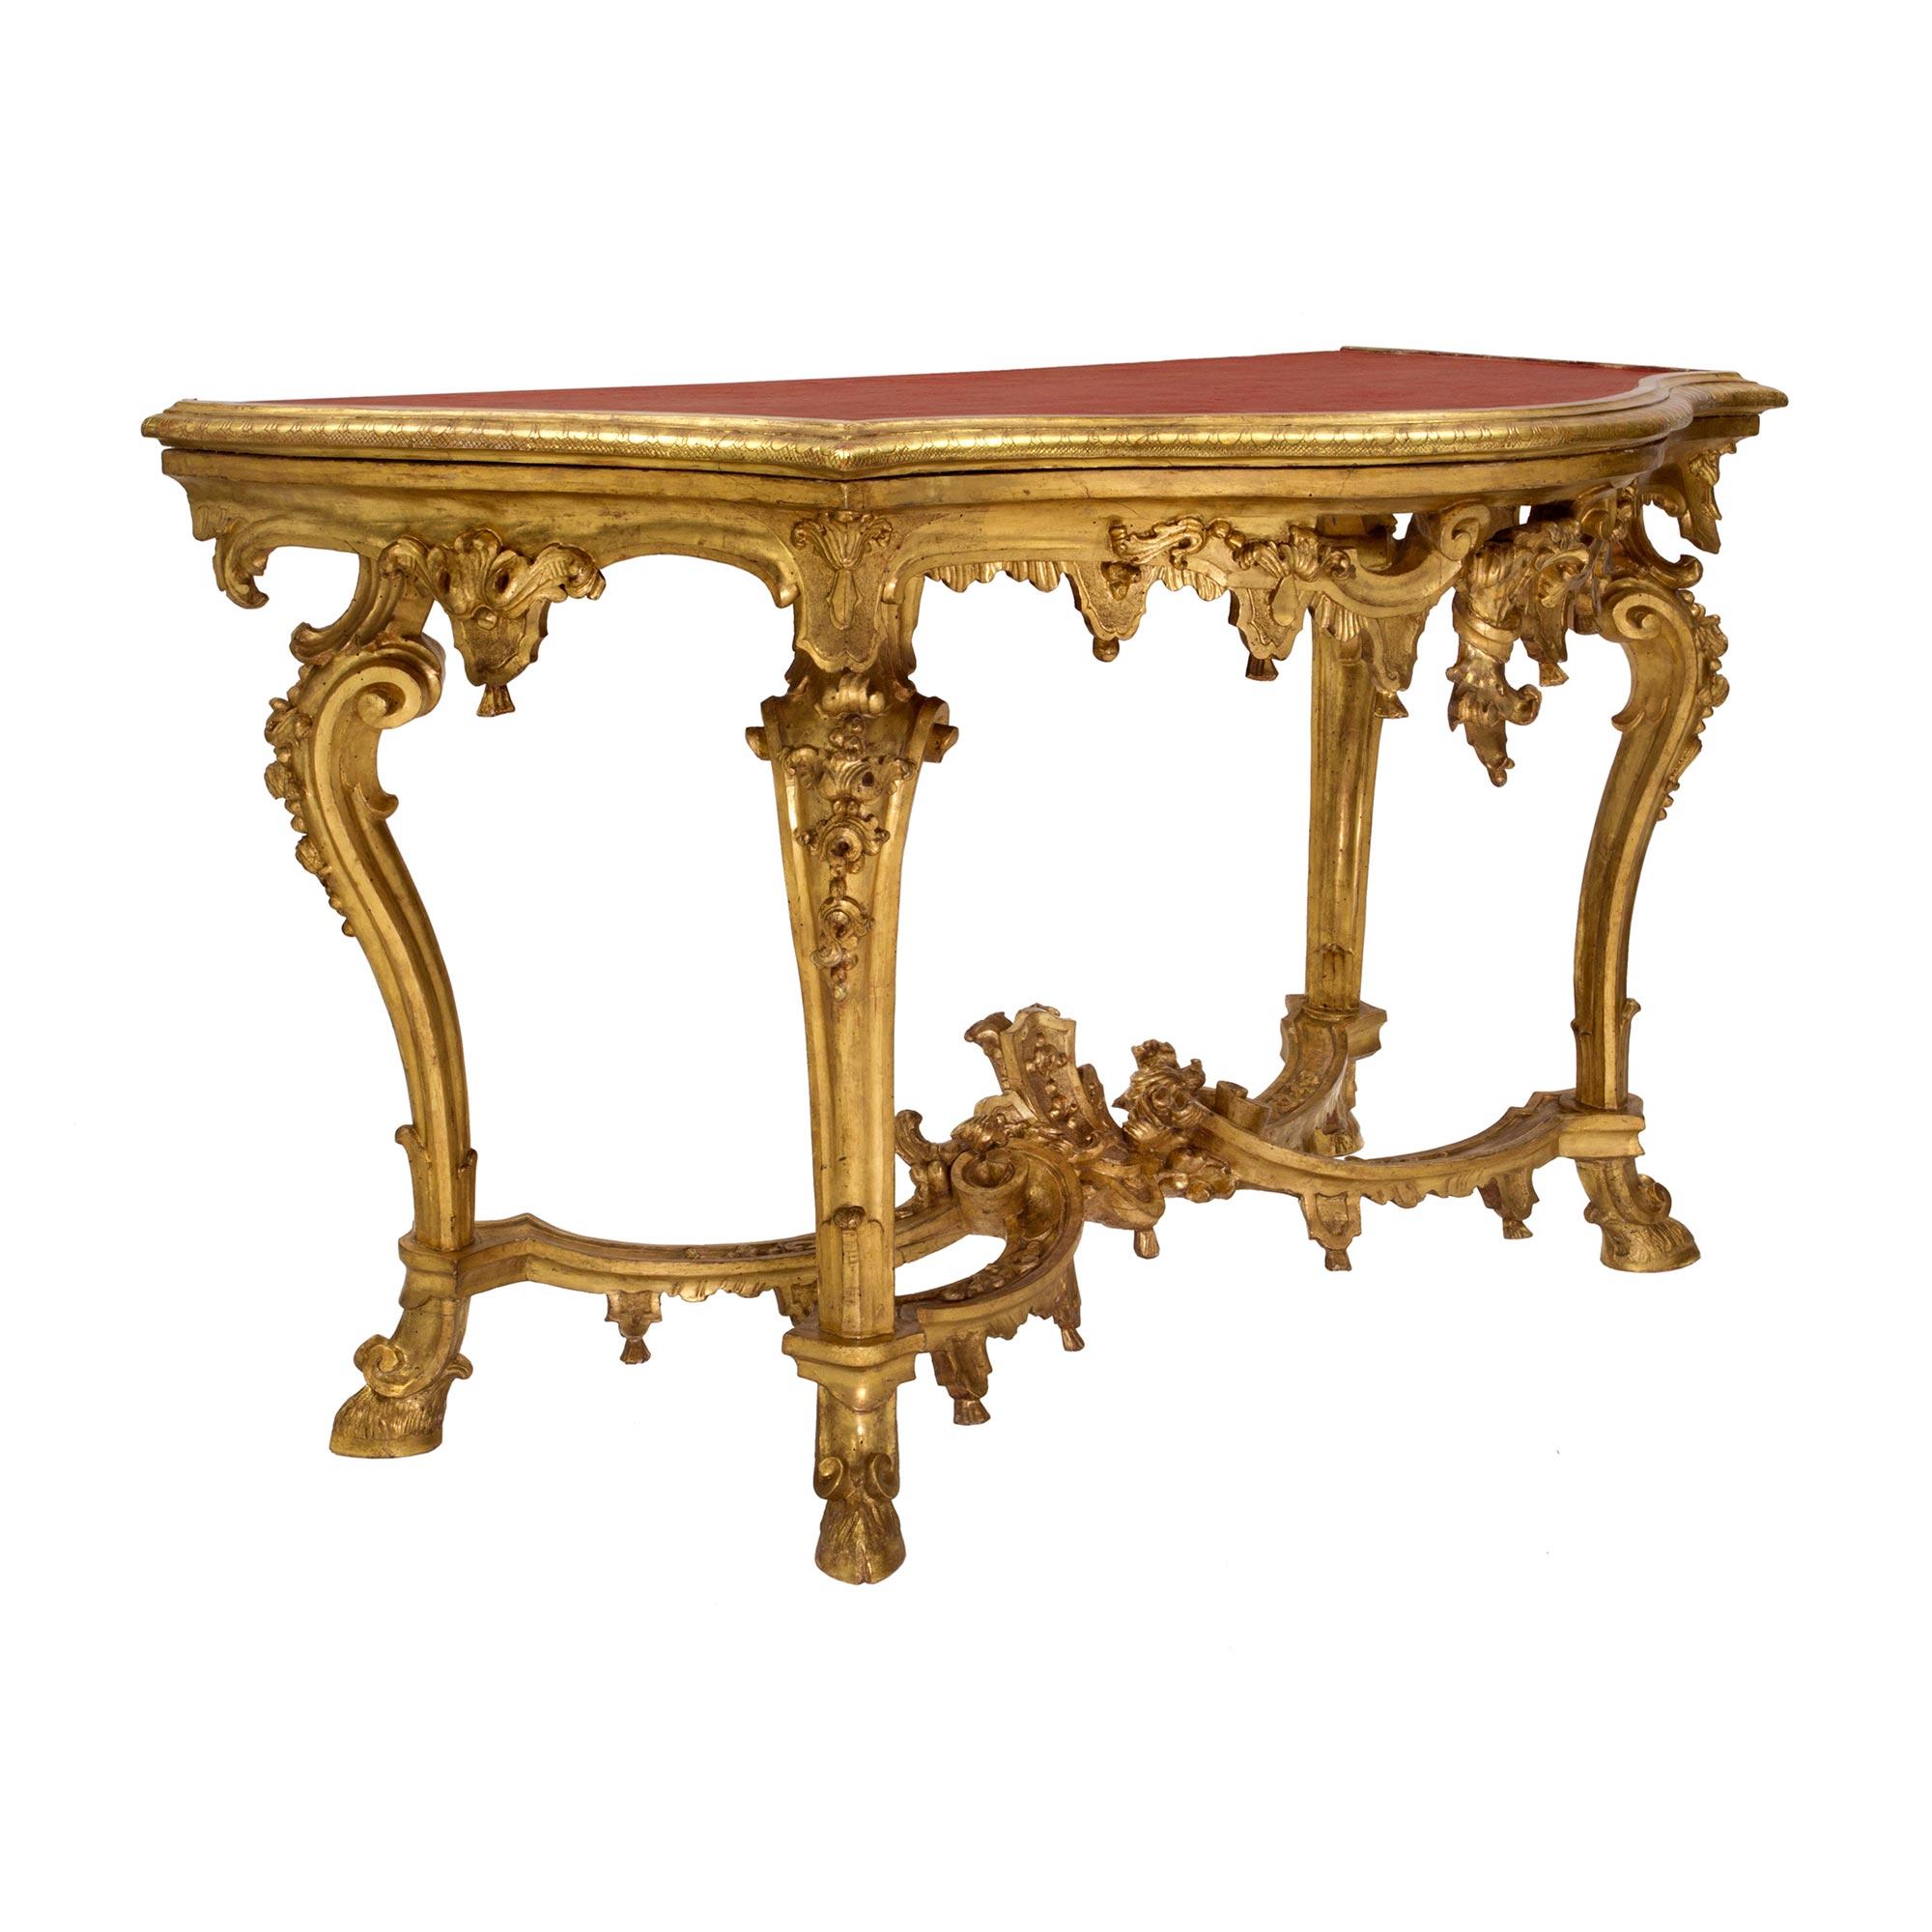 Italian 18th Century Louis XIV Period Venetian Giltwood Console In Good Condition For Sale In West Palm Beach, FL